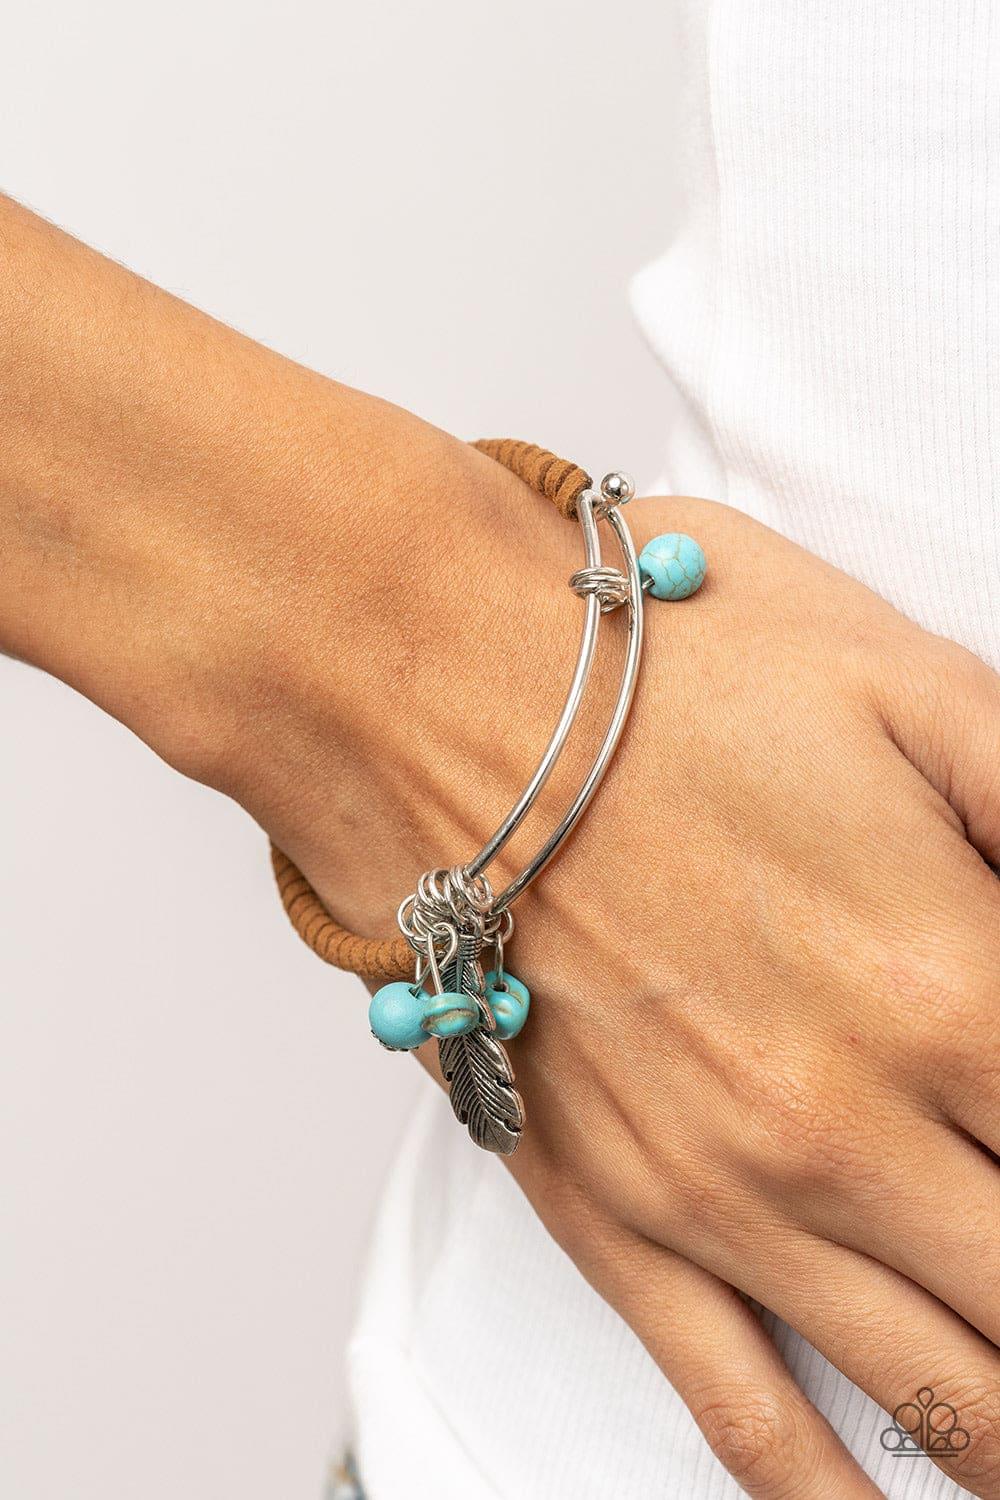 Paparazzi Accessories - Running A-fowl - Blue Turquoise Bracelet - Bling by JessieK